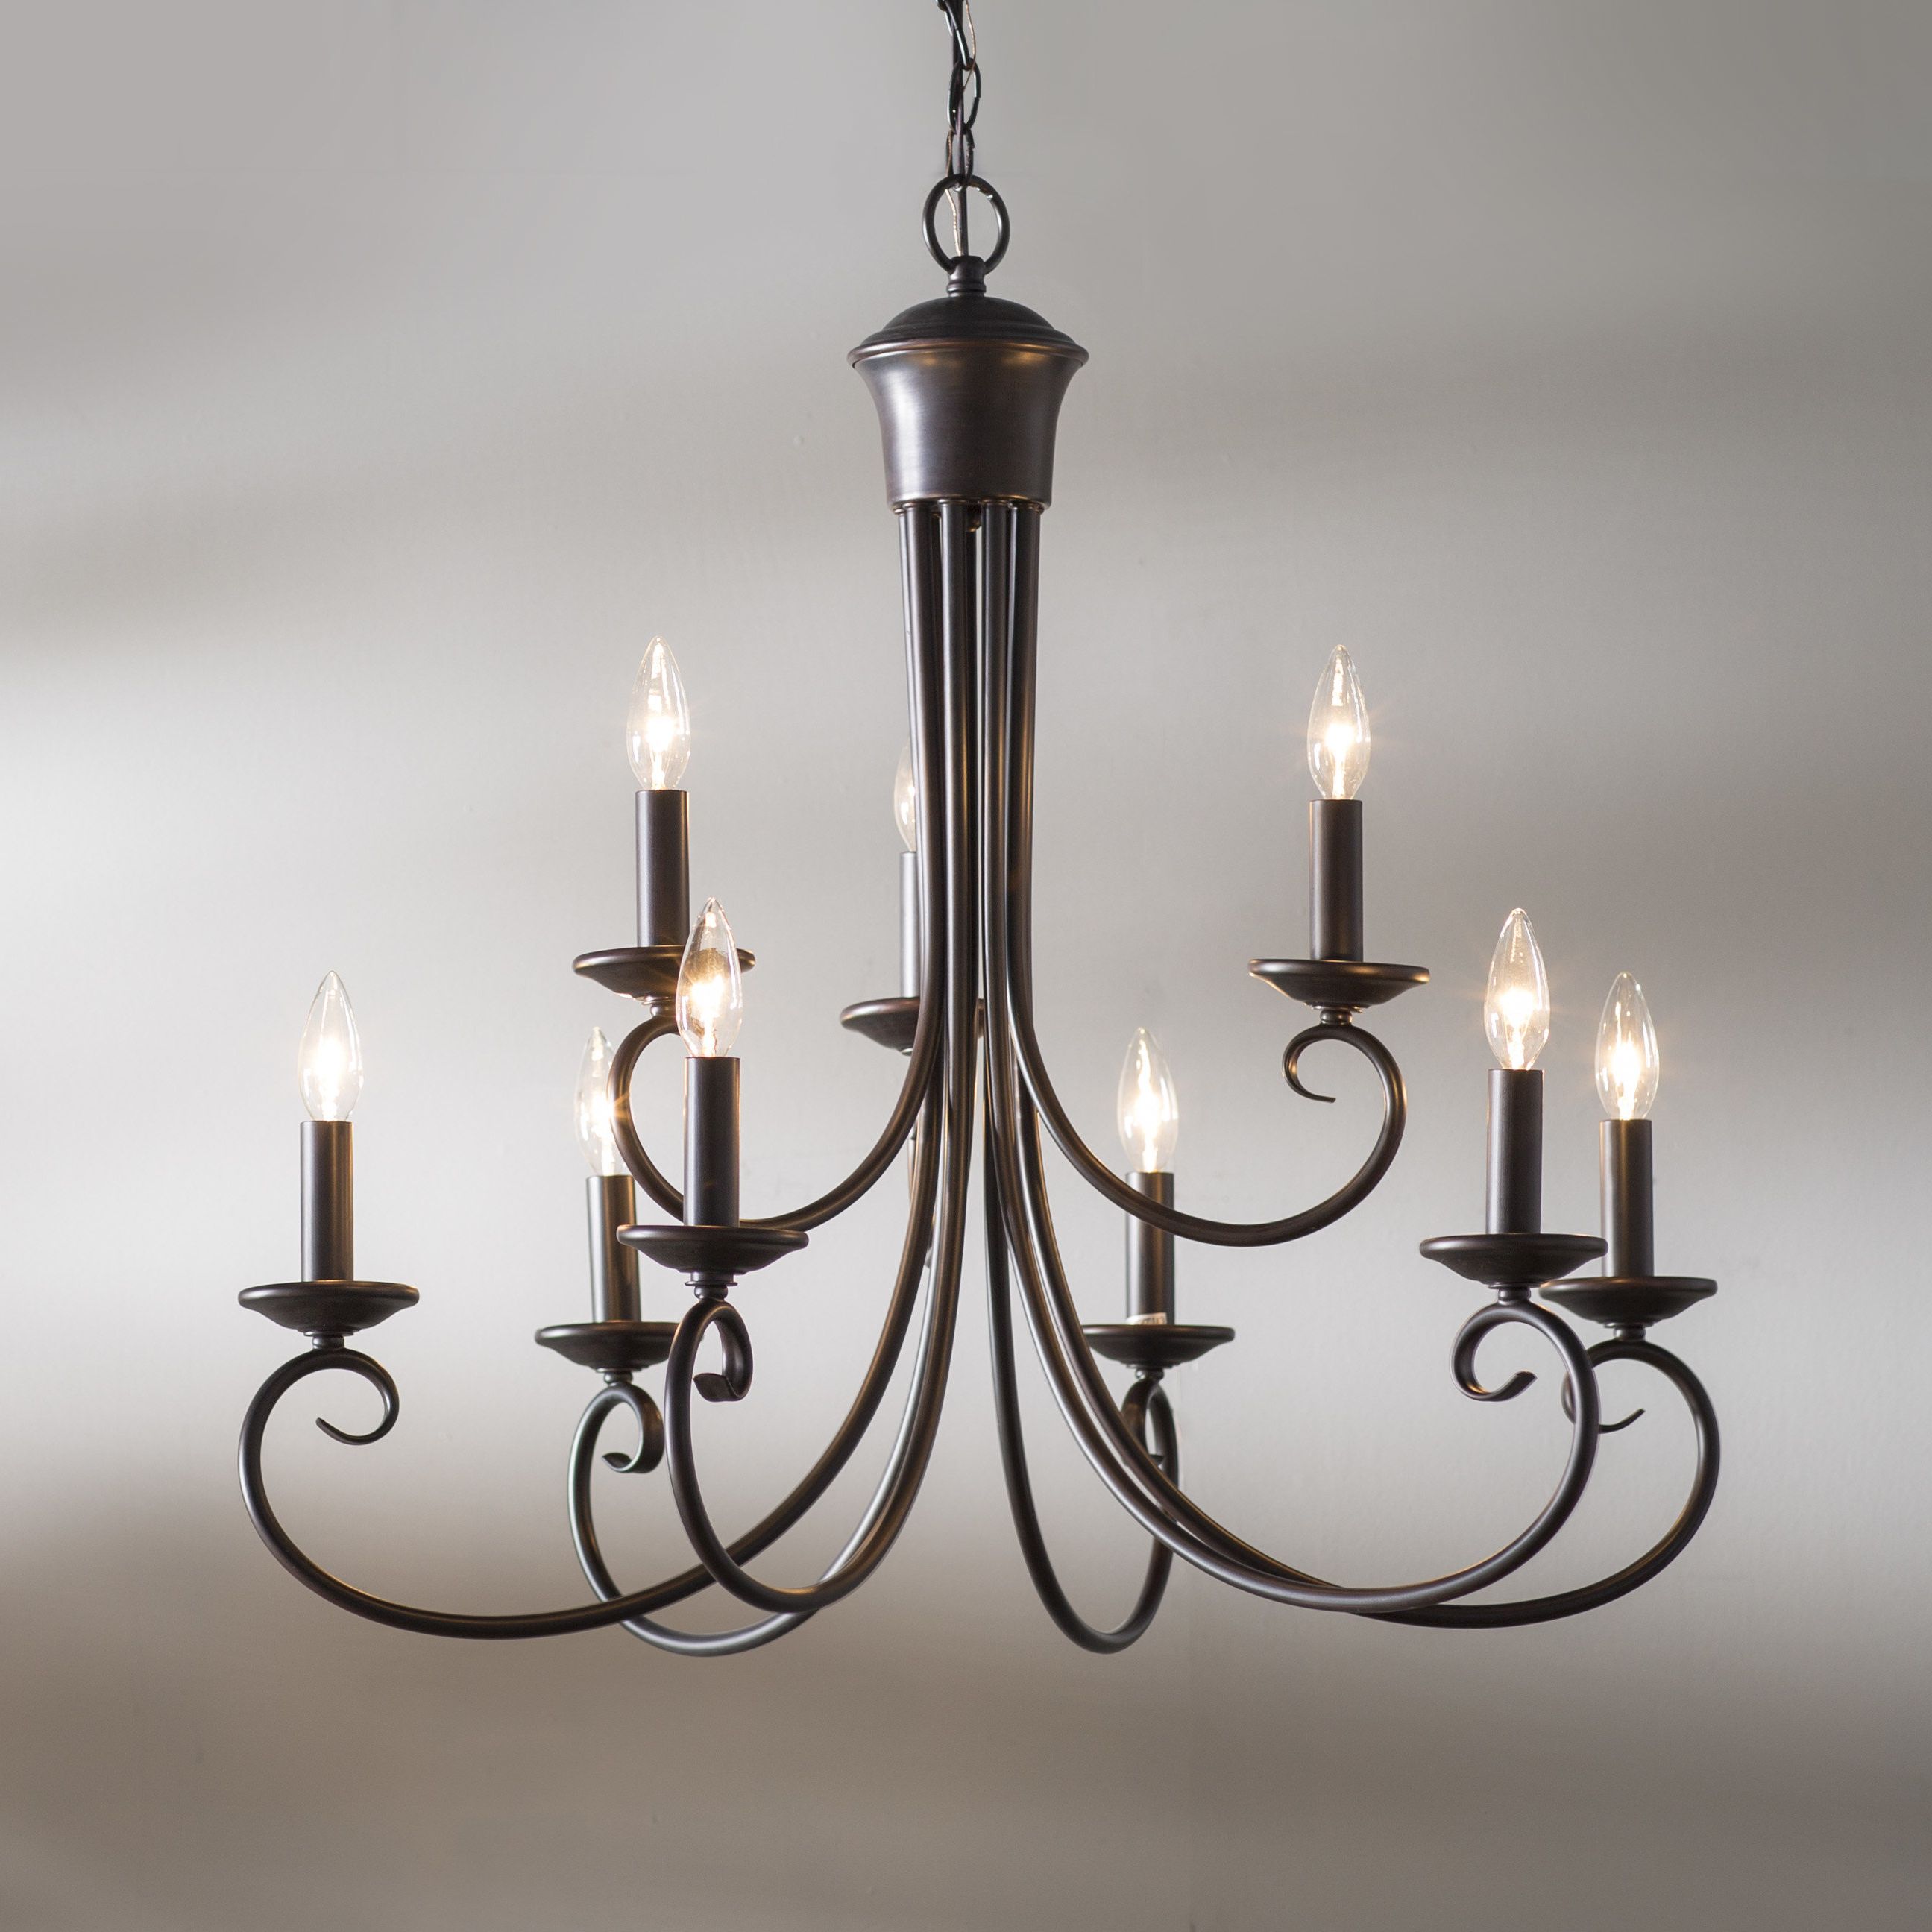 Trendy Kenedy 9 Light Candle Style Chandeliers In Kenedy 9 Light Candle Style Chandelier (View 1 of 20)